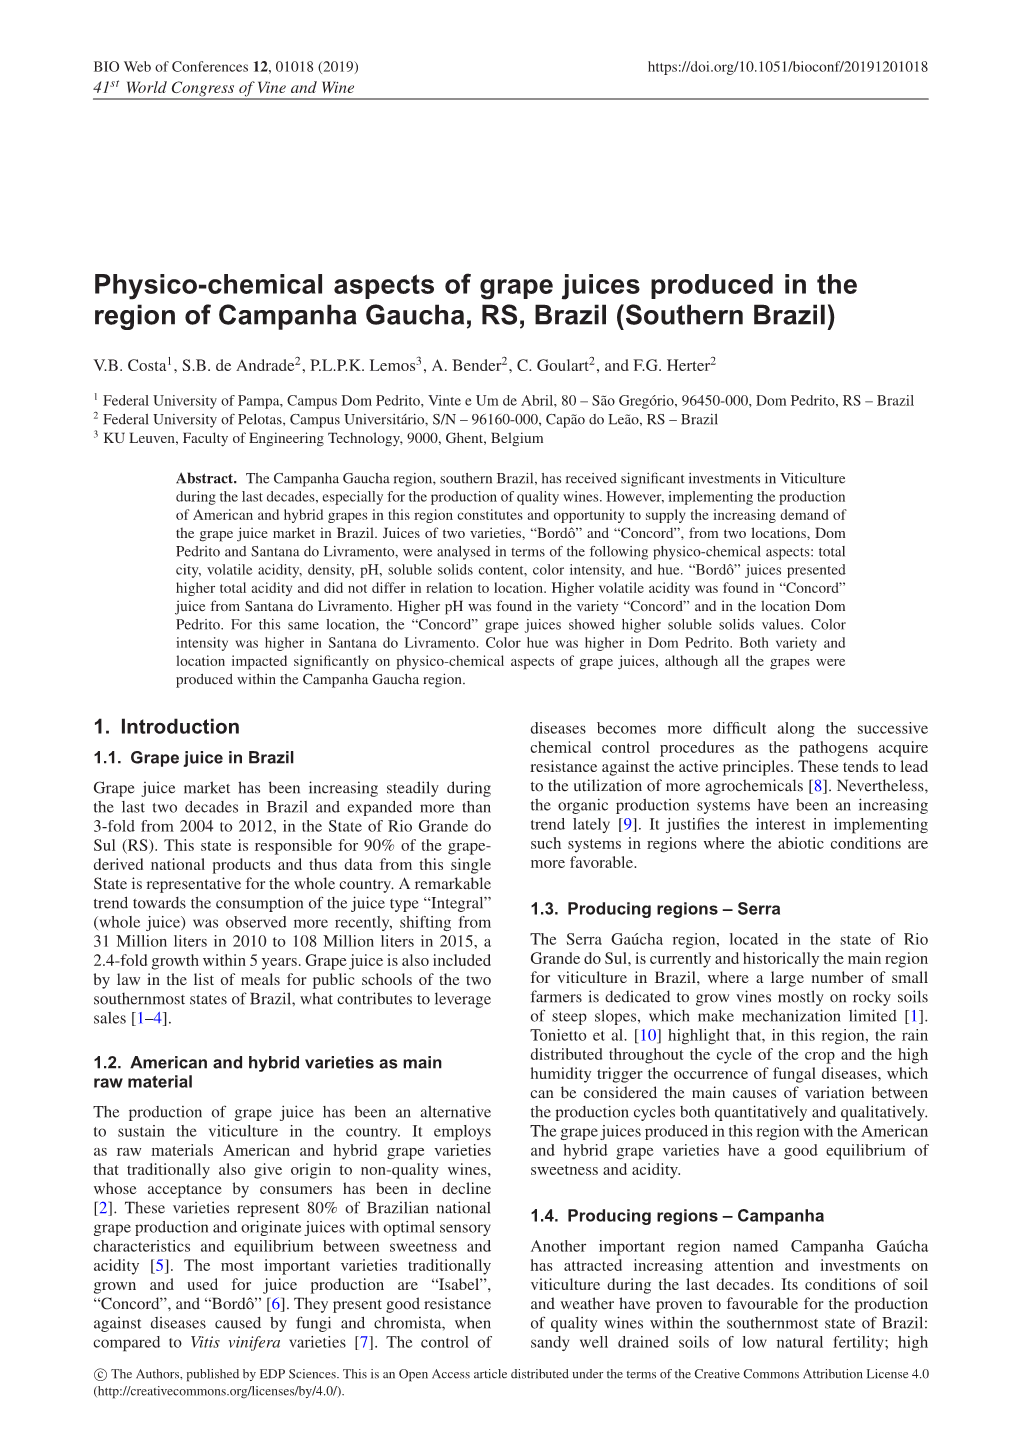 Physico-Chemical Aspects of Grape Juices Produced in the Region of Campanha Gaucha, RS, Brazil (Southern Brazil)